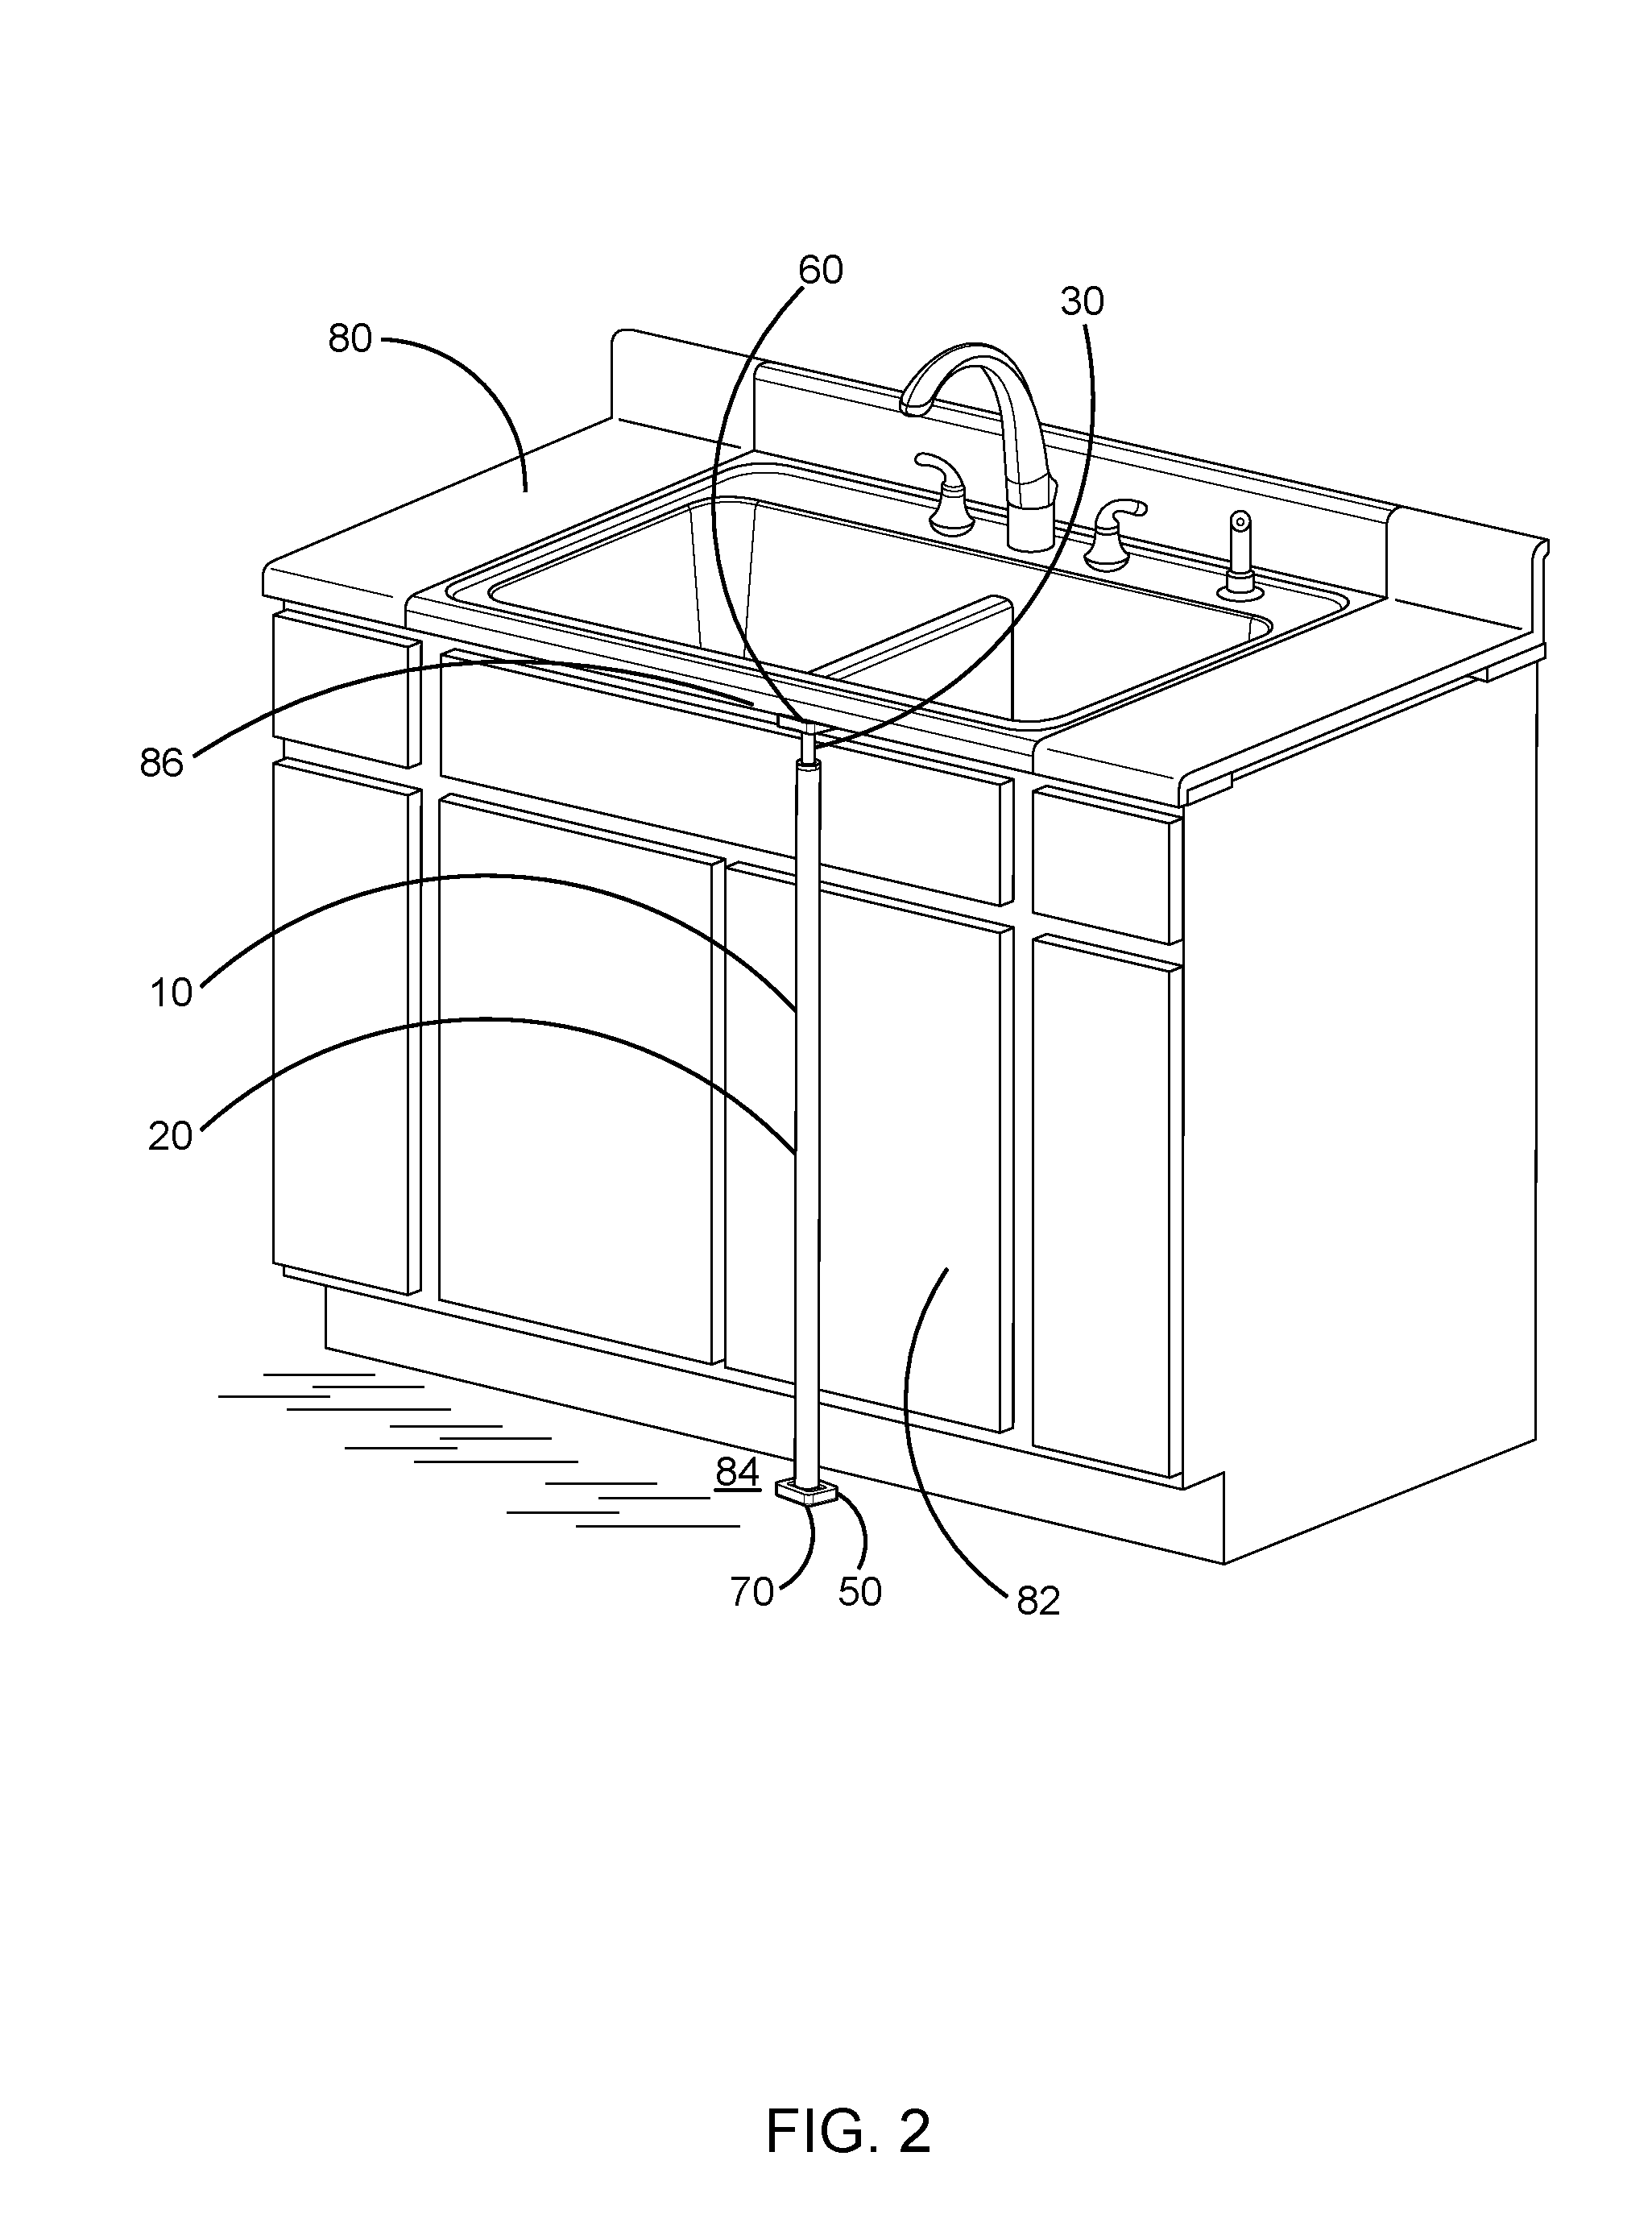 Cabinet door and drawer retaining device and method for securing cabinet doors and drawers